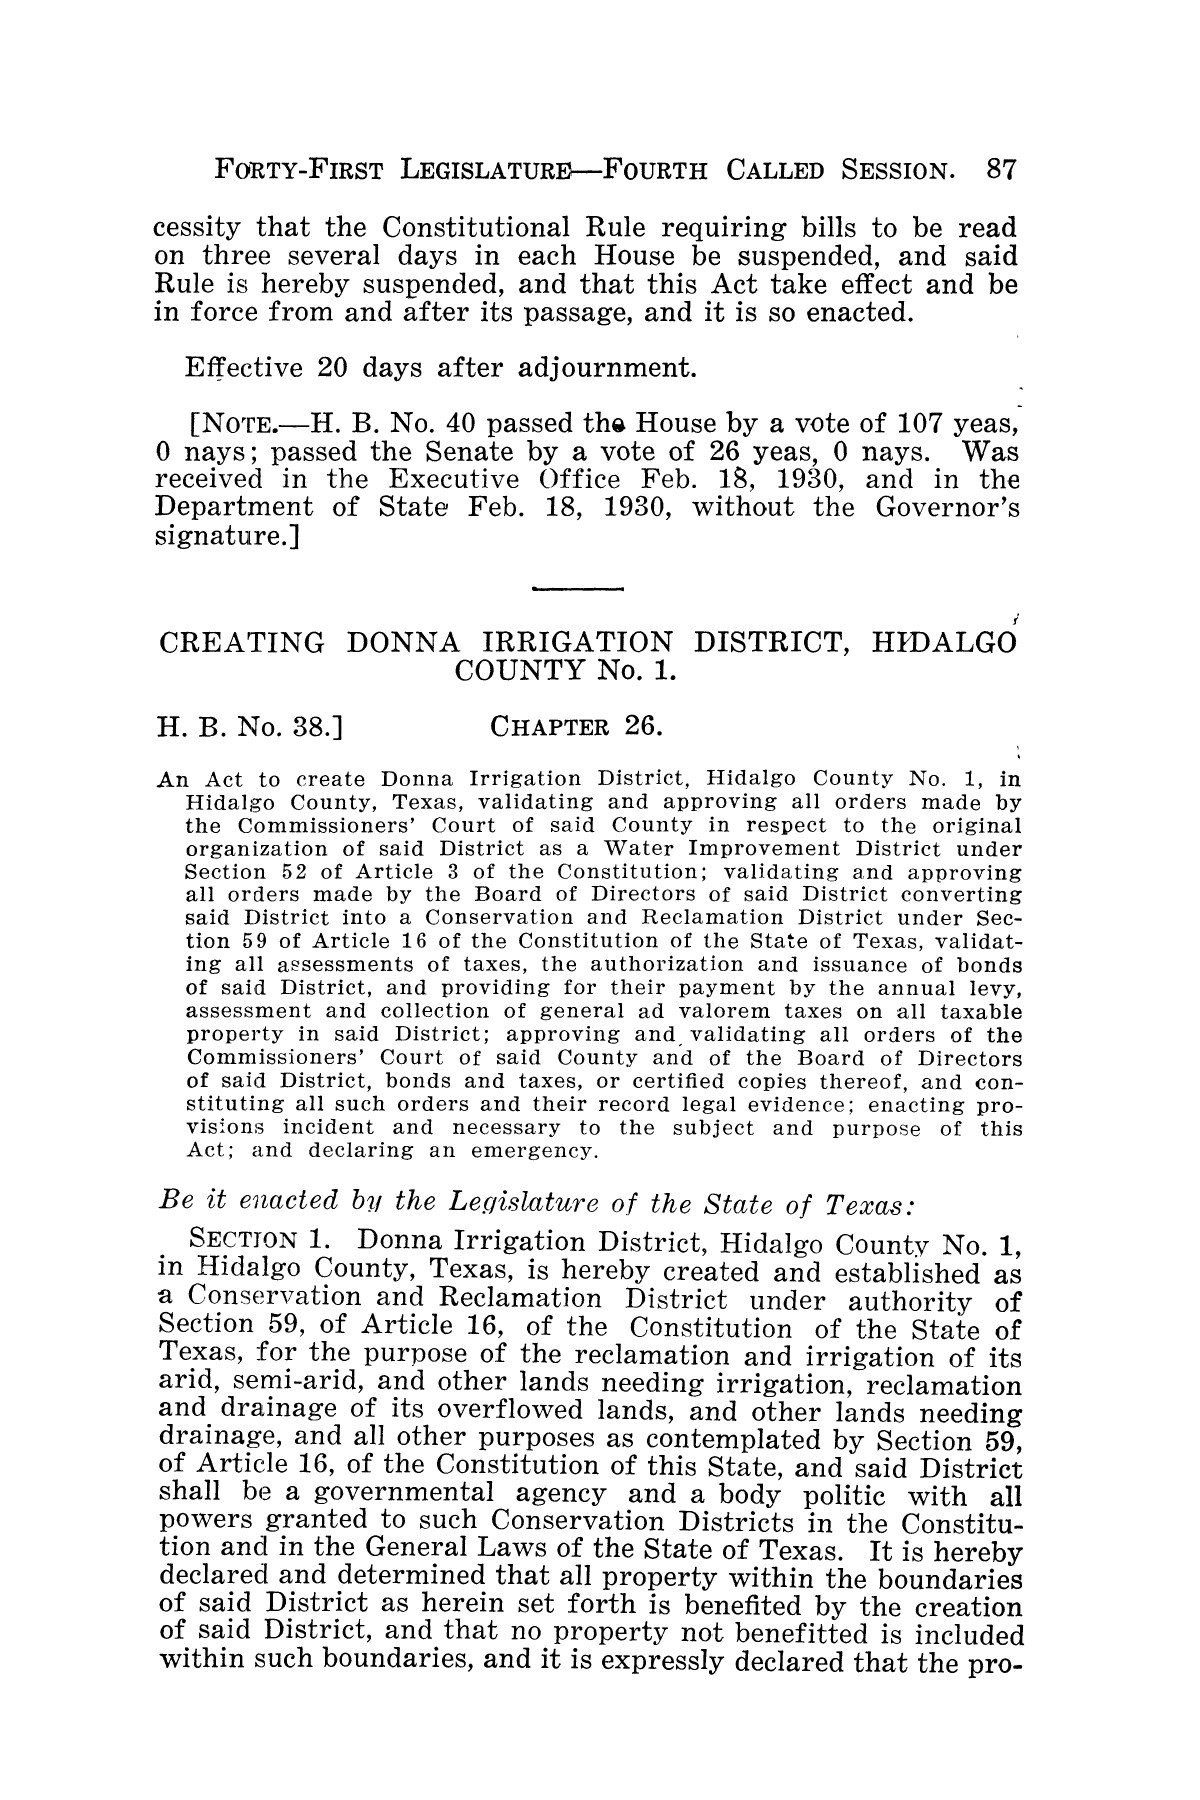 The Laws of Texas, 1929-1931 [Volume 27]
                                                
                                                    [Sequence #]: 401 of 1943
                                                